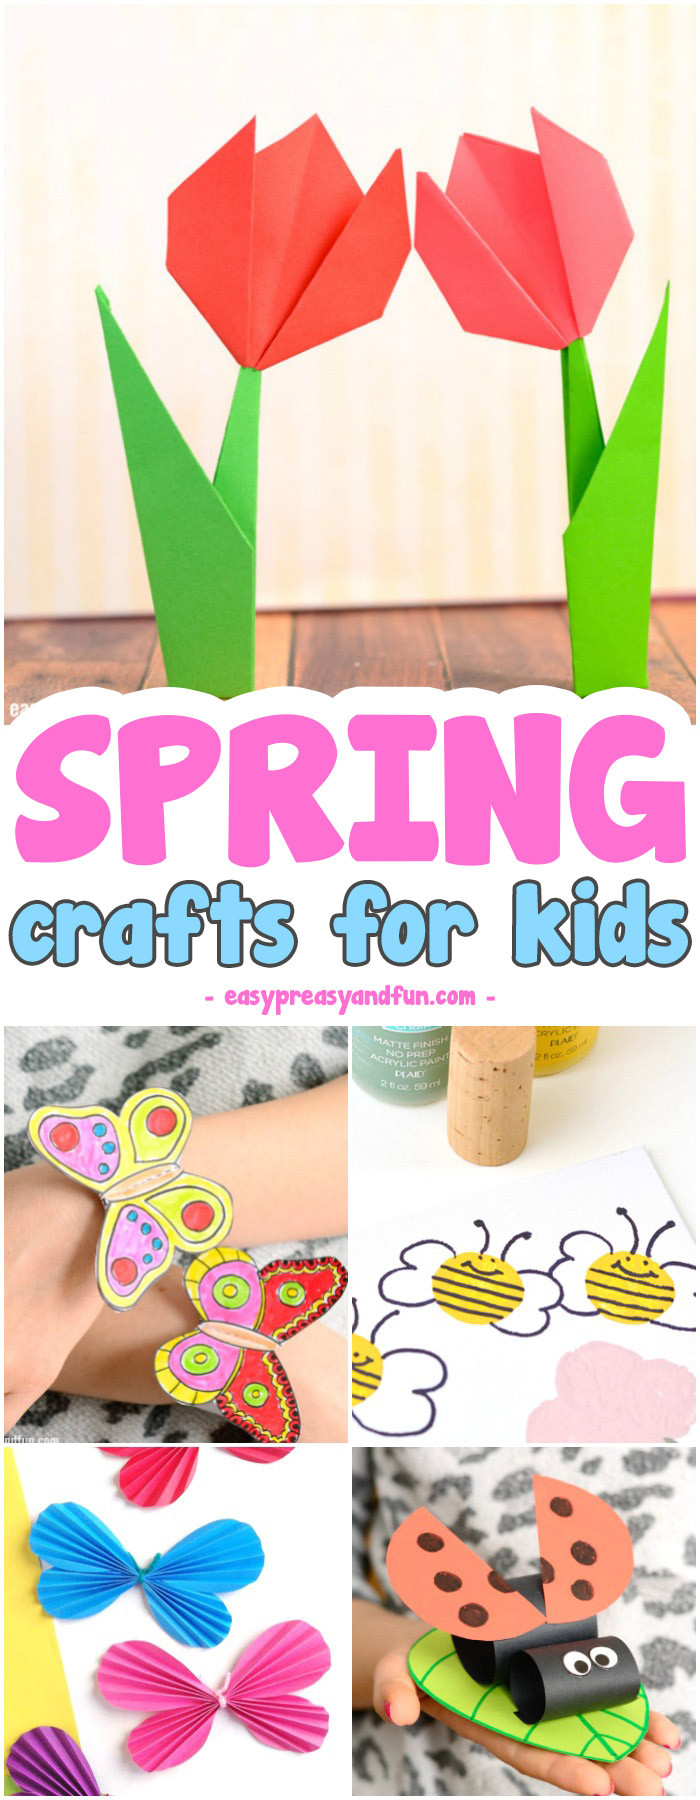 Spring Arts And Crafts For Toddlers
 Spring Crafts for Kids Art and Craft Project Ideas for